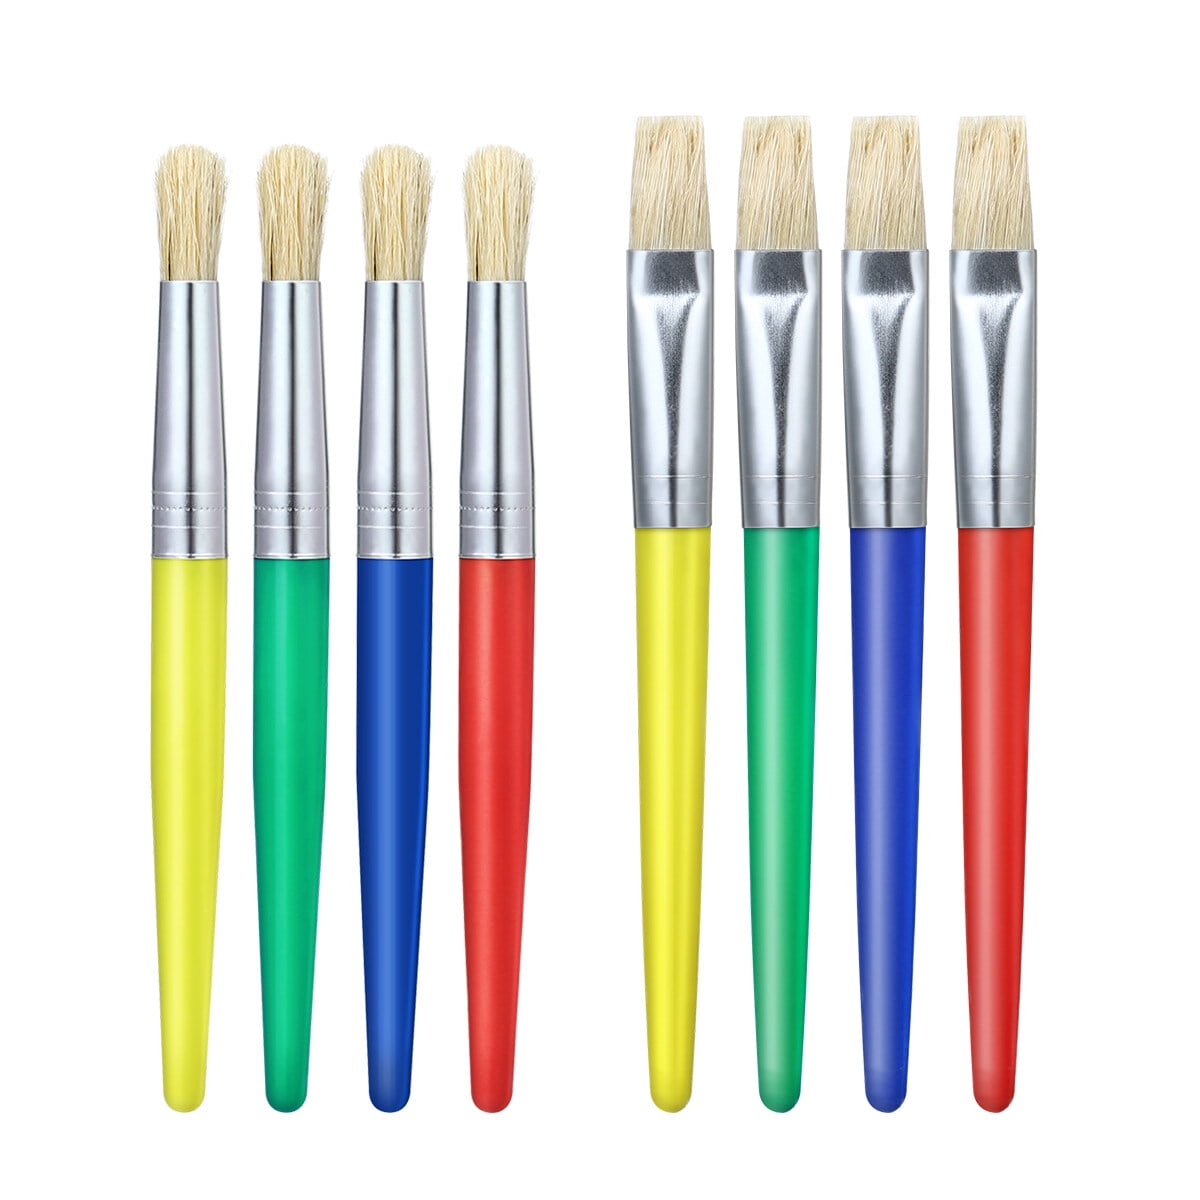 6 Pcs/Set Educational Kids Nylon Handle Brush Great Paint Brushes Craft Toy  Watercolor Drawing Painting Kindergarten Crafts